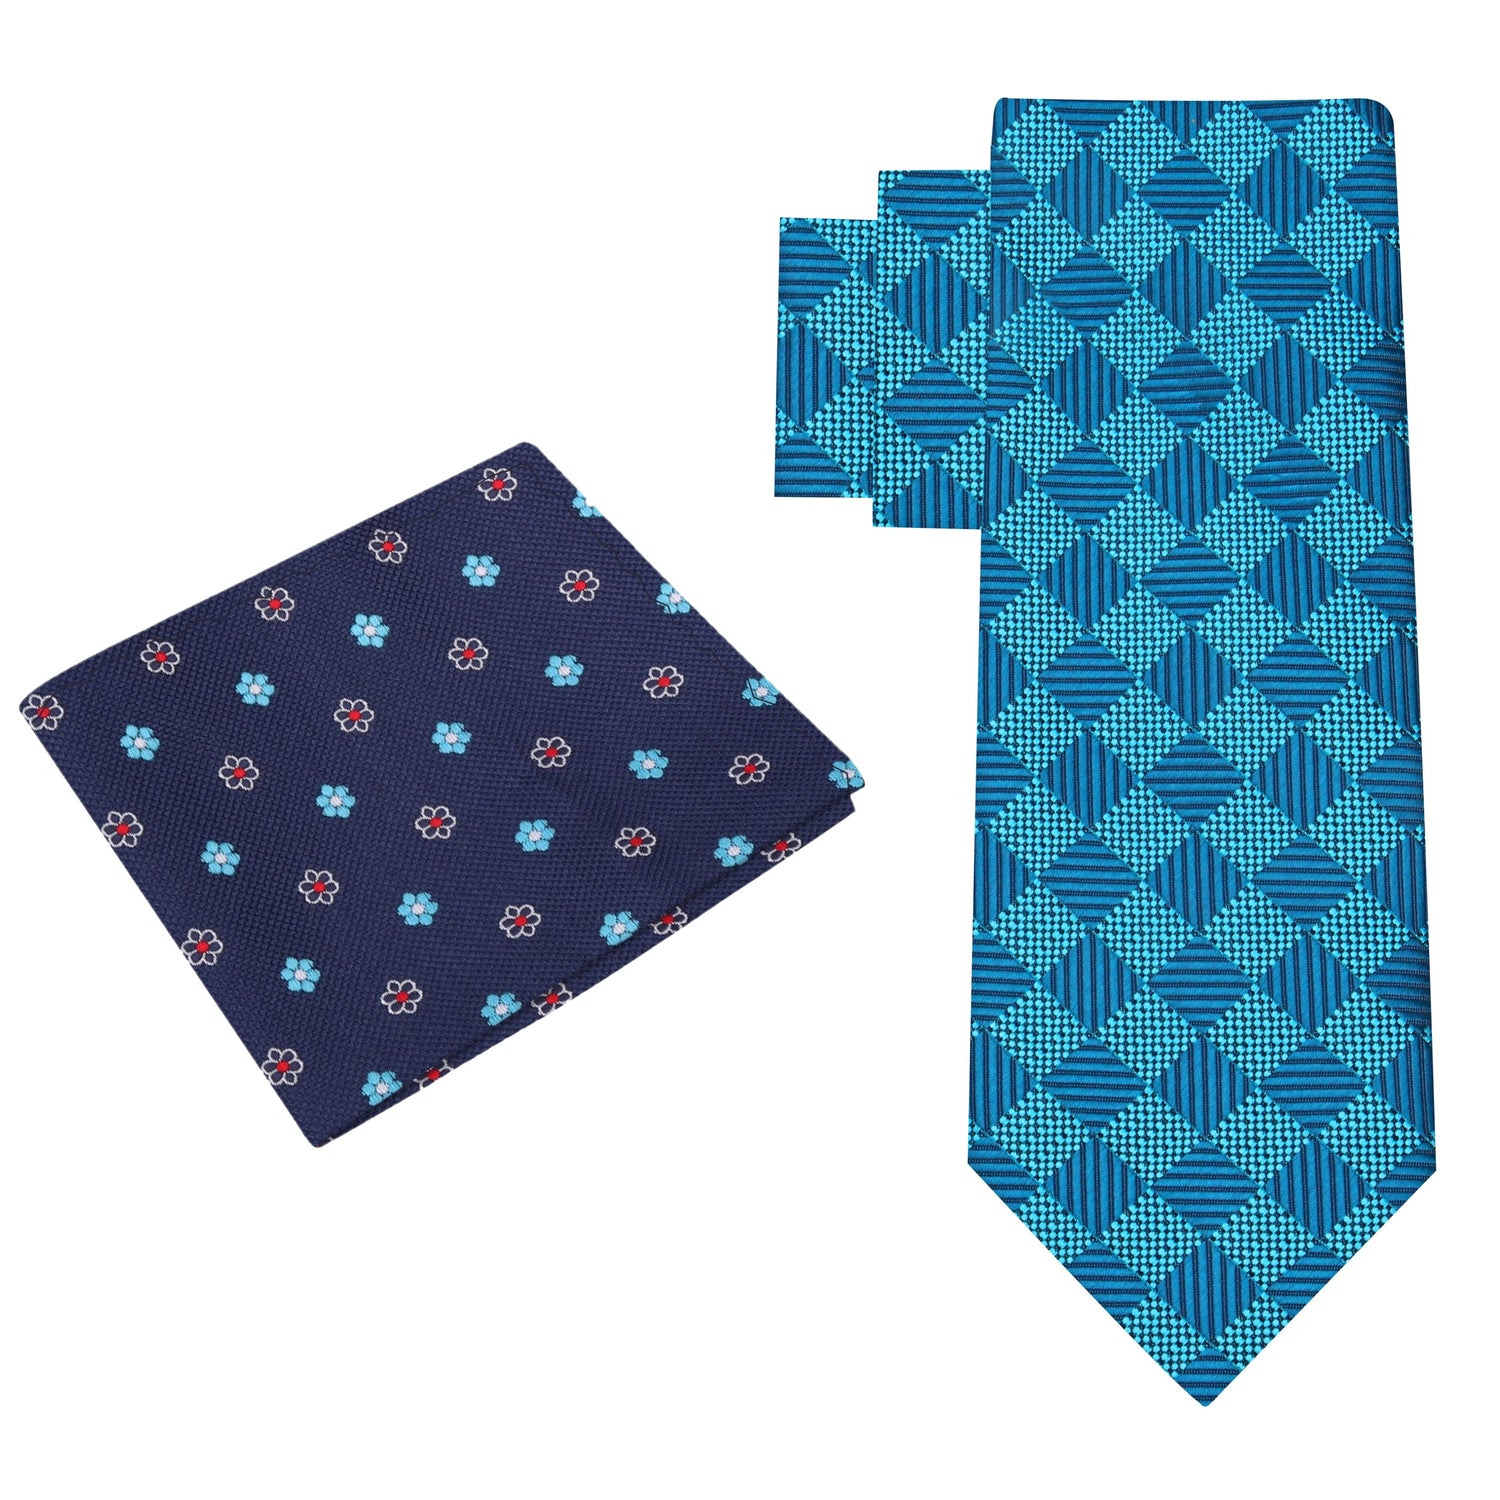 Alt View: Rich Cyan Blue Geometric Diamonds Tie and Accenting Floral Square